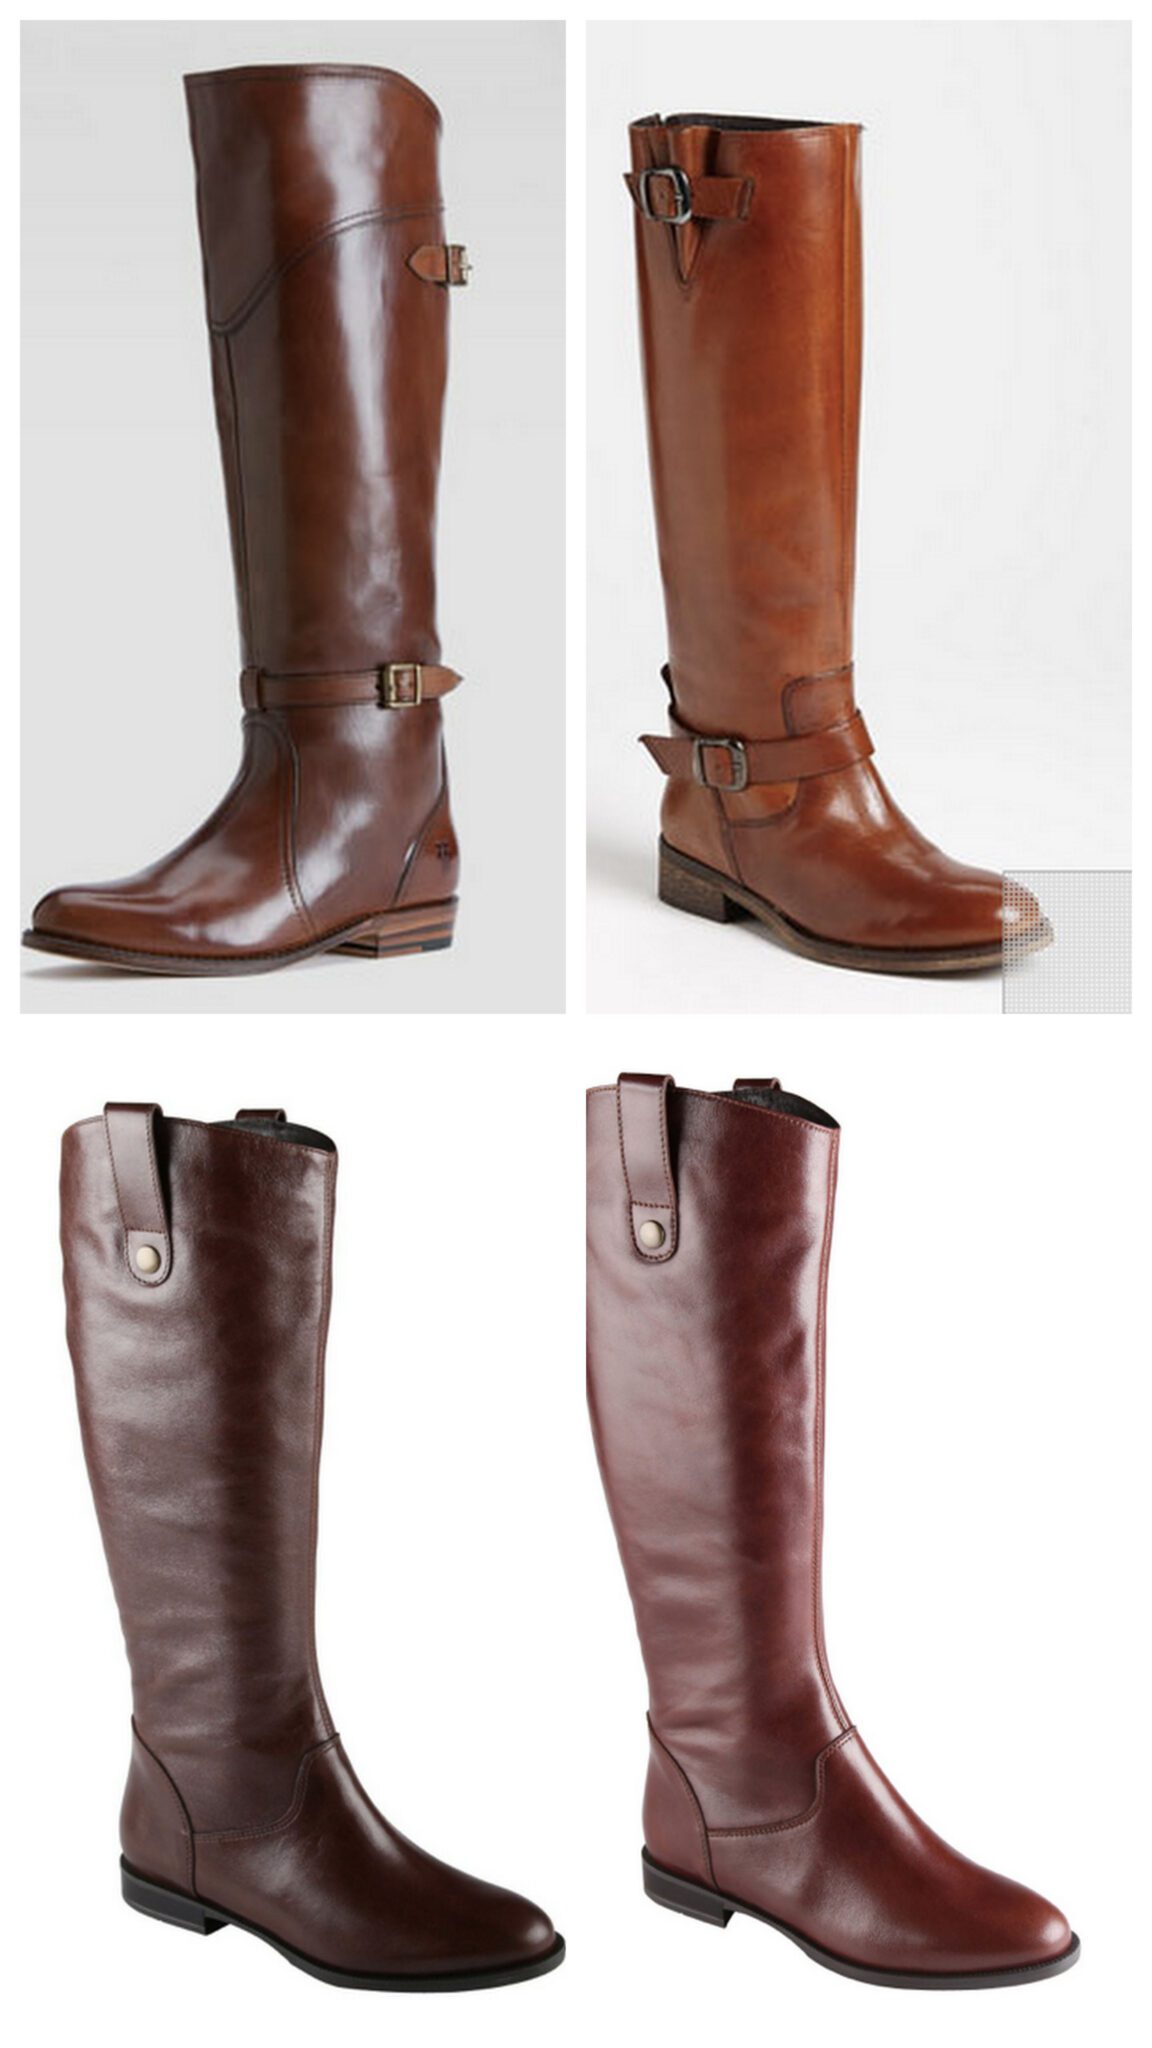 Frye's Dorado Riding Boot Alternative - Hither and Thither